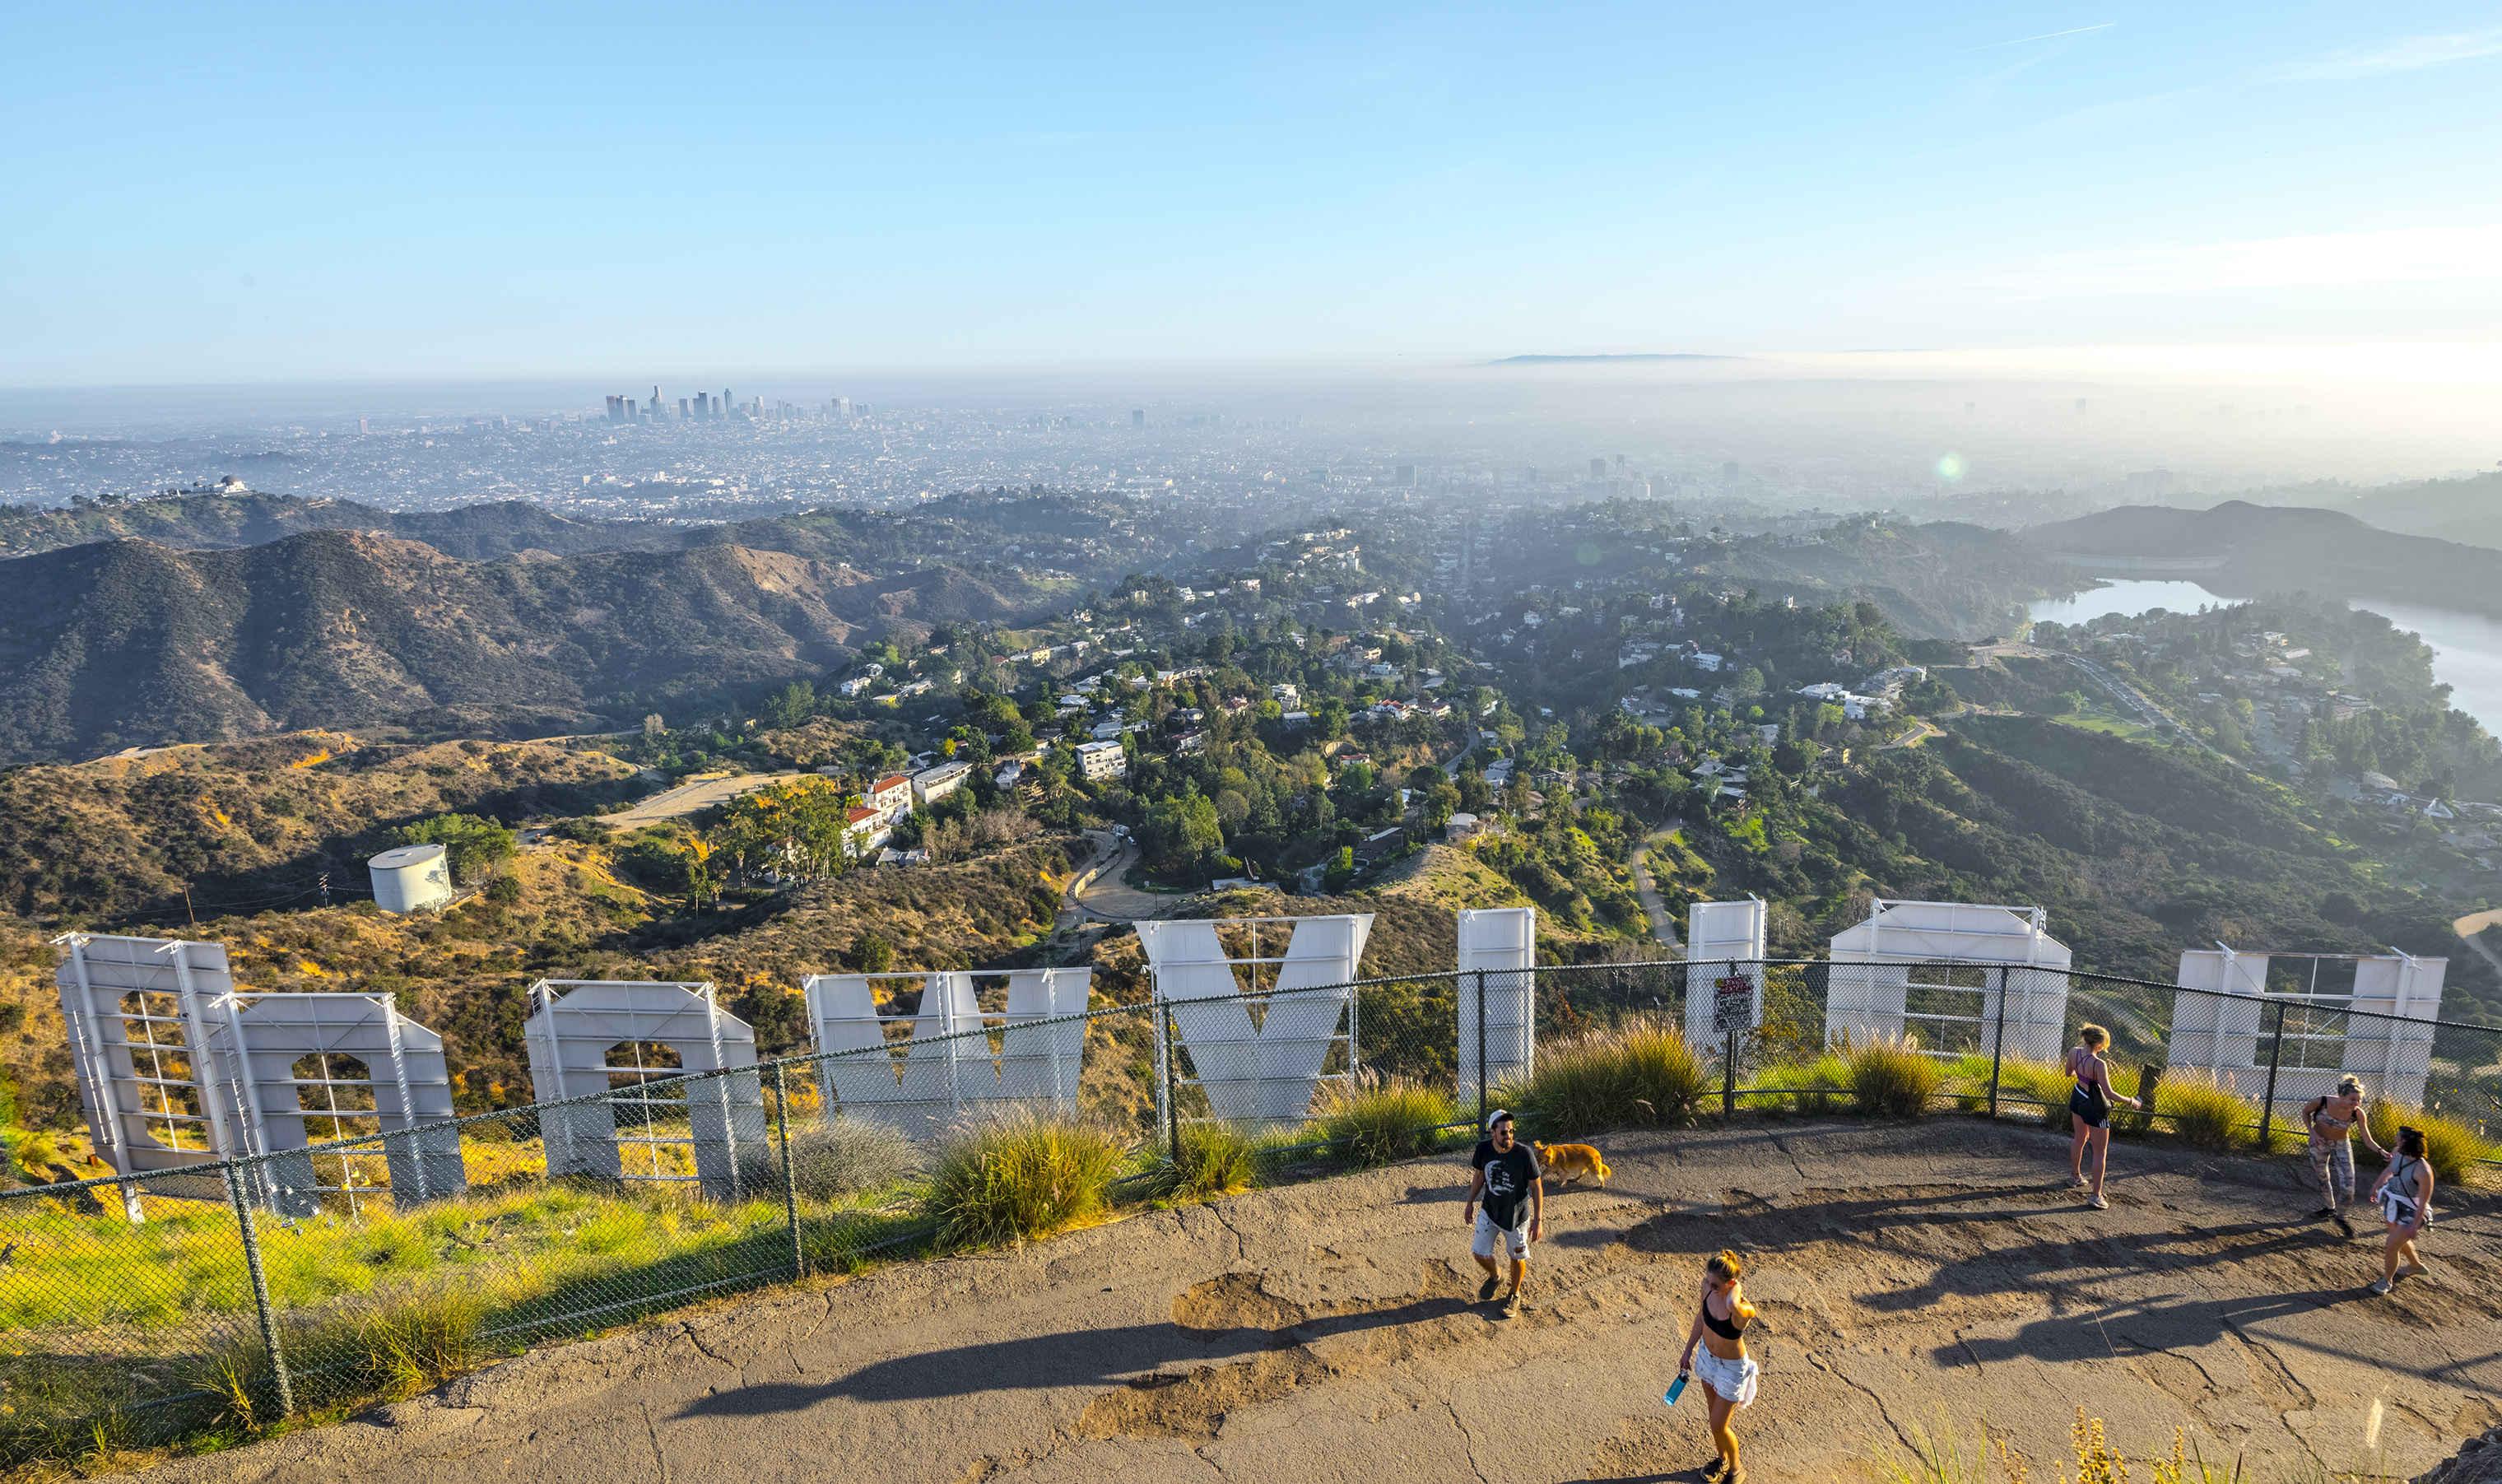 Hikers take in the view from the iconic Hollywood sign in the Hollywood Hills.